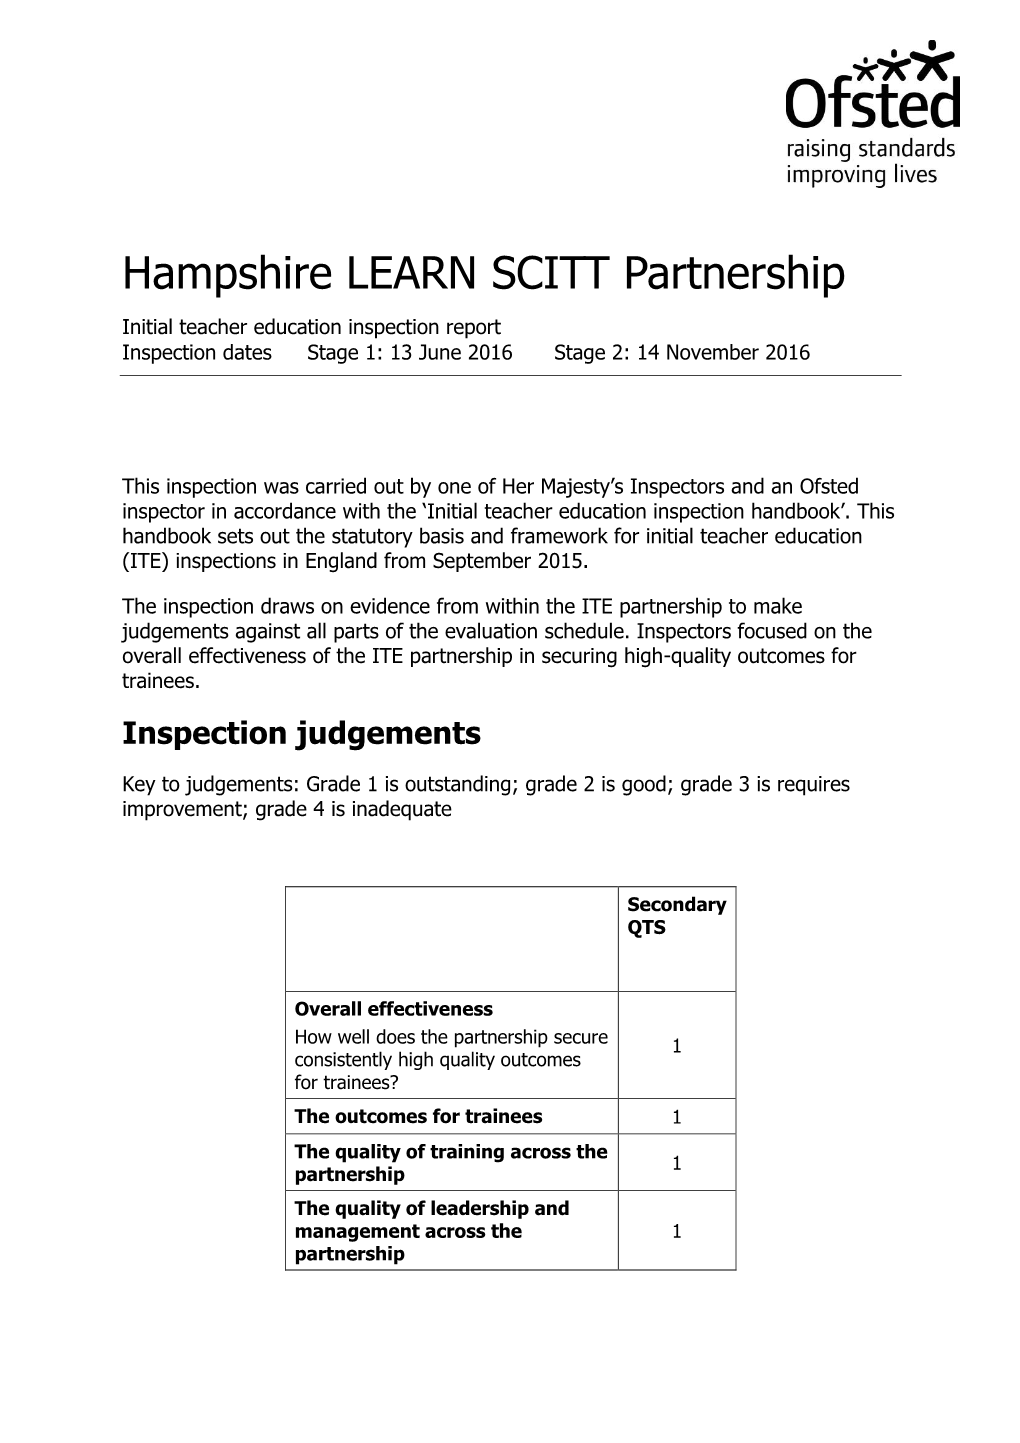 Hampshire Learn SCITT Partnership Ofsted Report